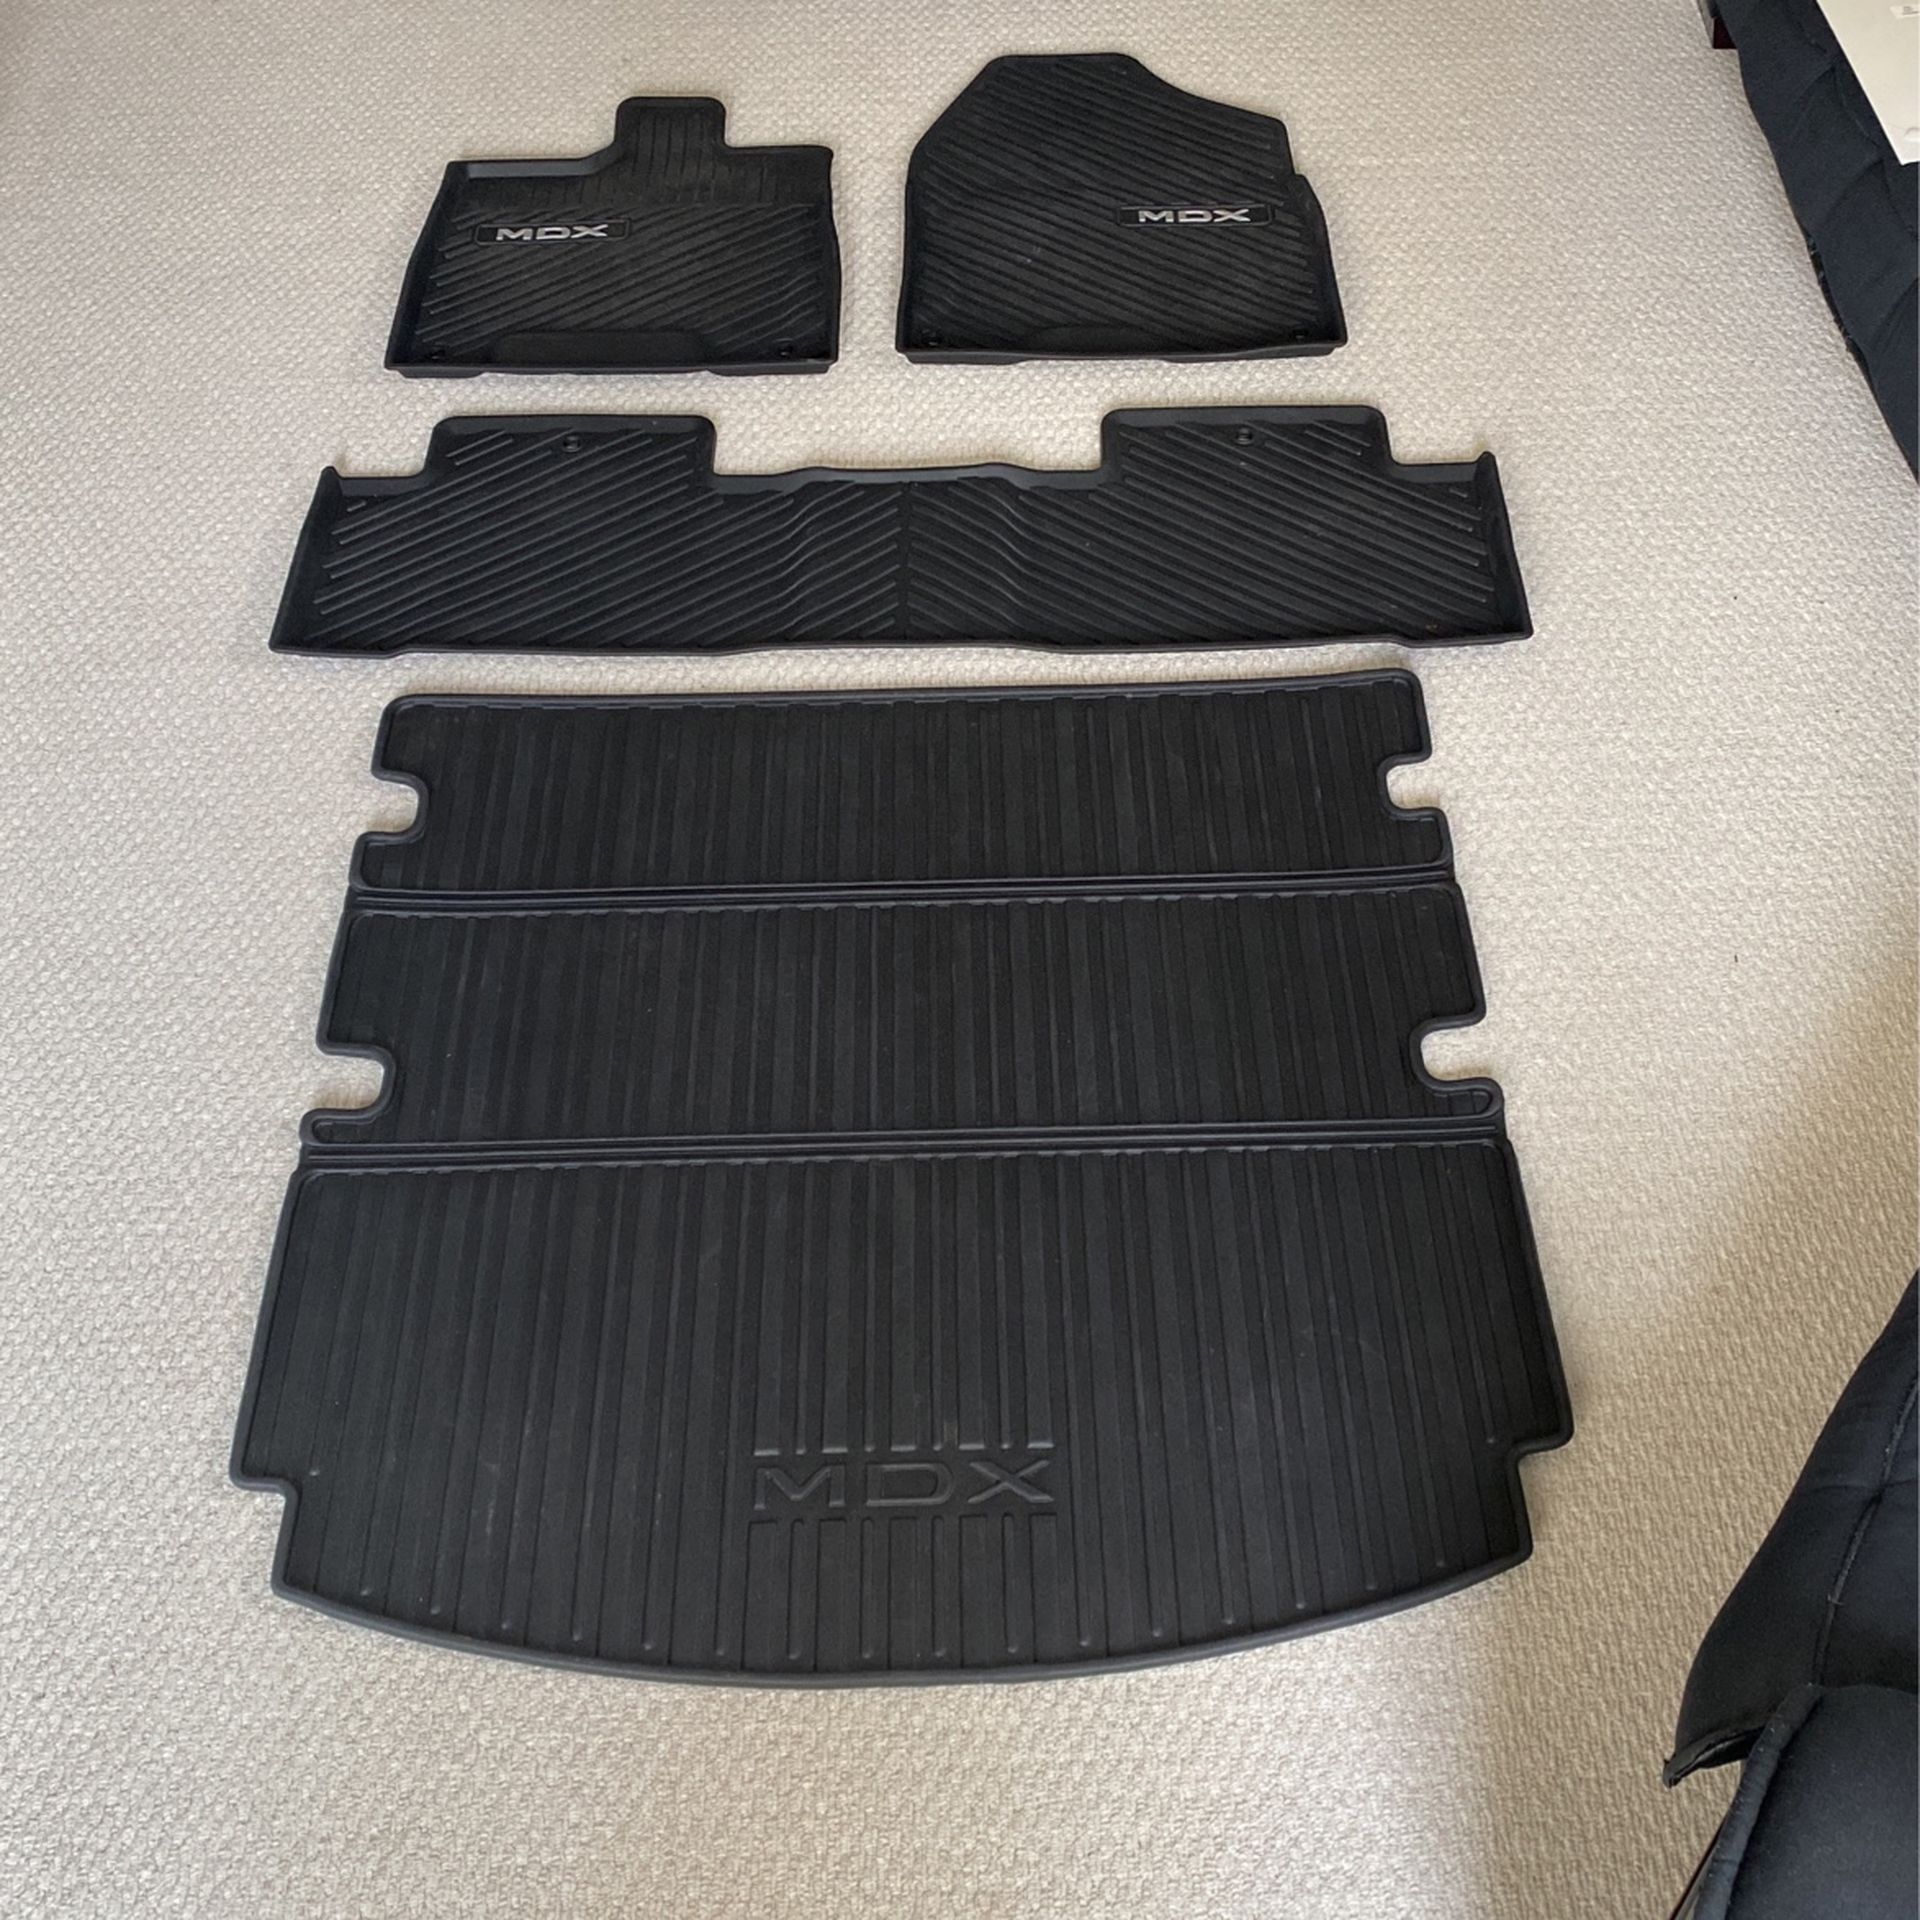 All Whether Floor Mats For Acura MDX 2014 Thru 2020 Brand New Originally Paid $475.00 Asking For $150.00